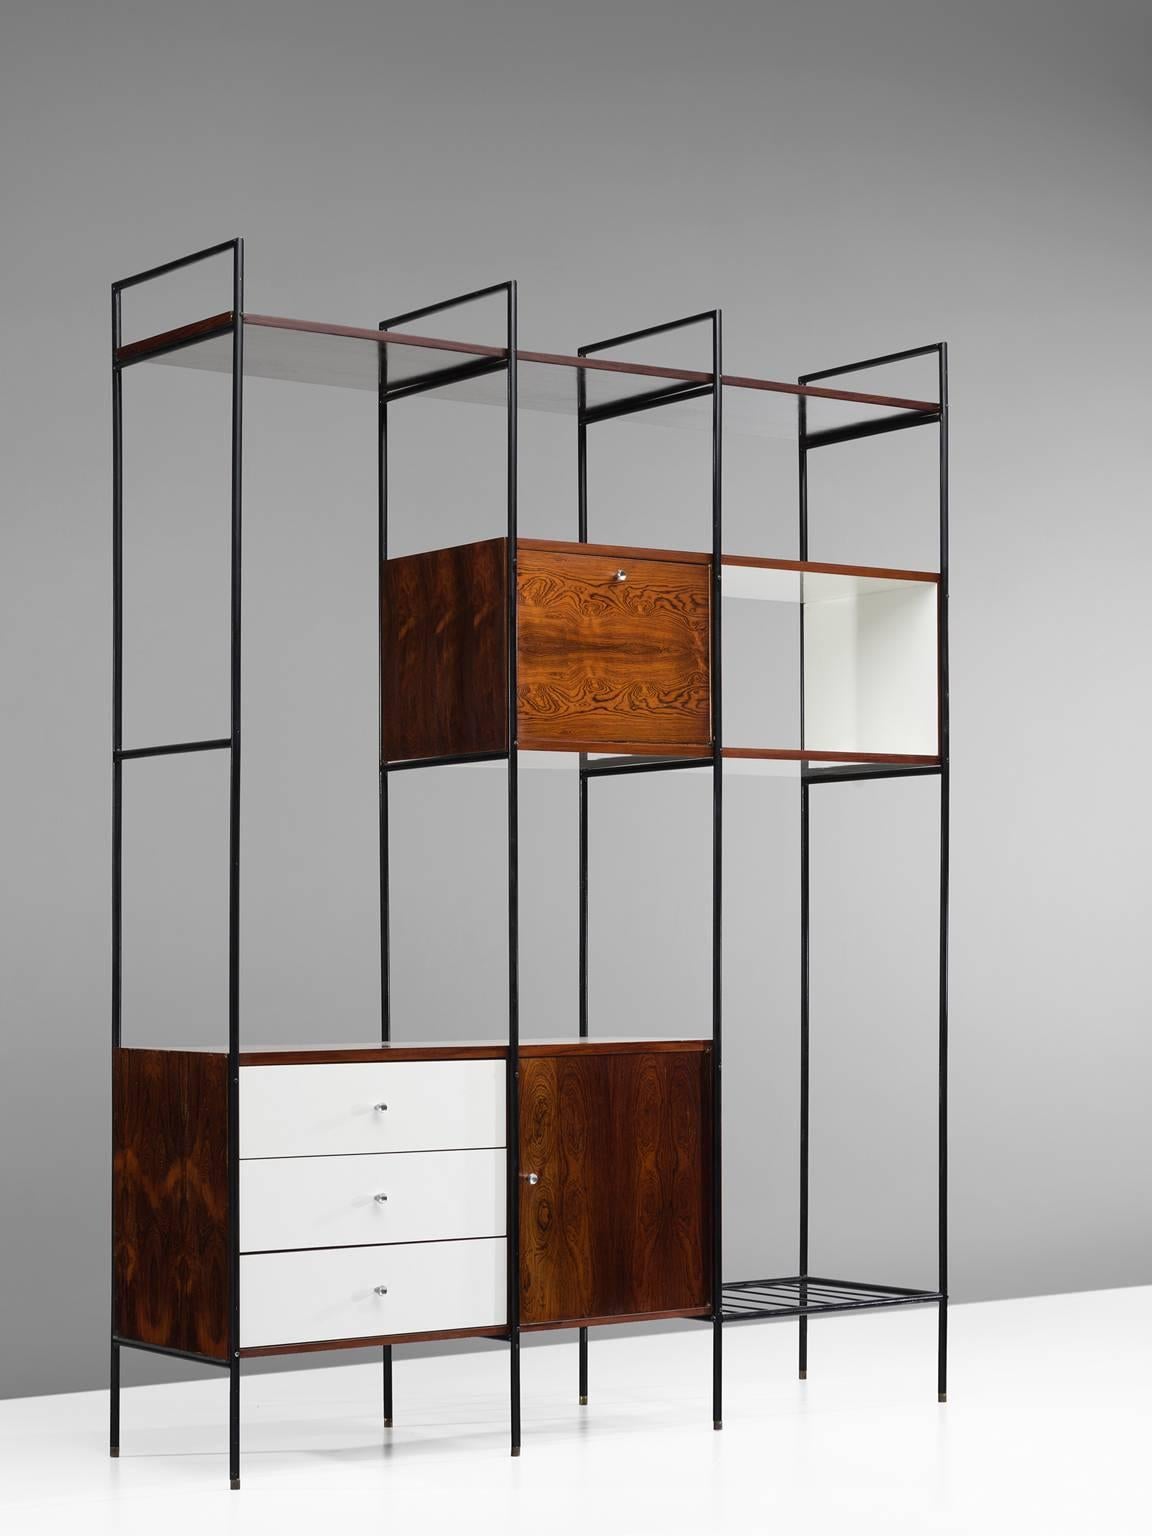 Geraldo de Barros, wall unit MF 710 Bookshelf, iron, plywood veneered with white Formica and rosewood, Brazil, 1954.

Slender wall unit by the Brazilian modernist designer Geraldo de Barros. This playful design has two doors and three drawers.